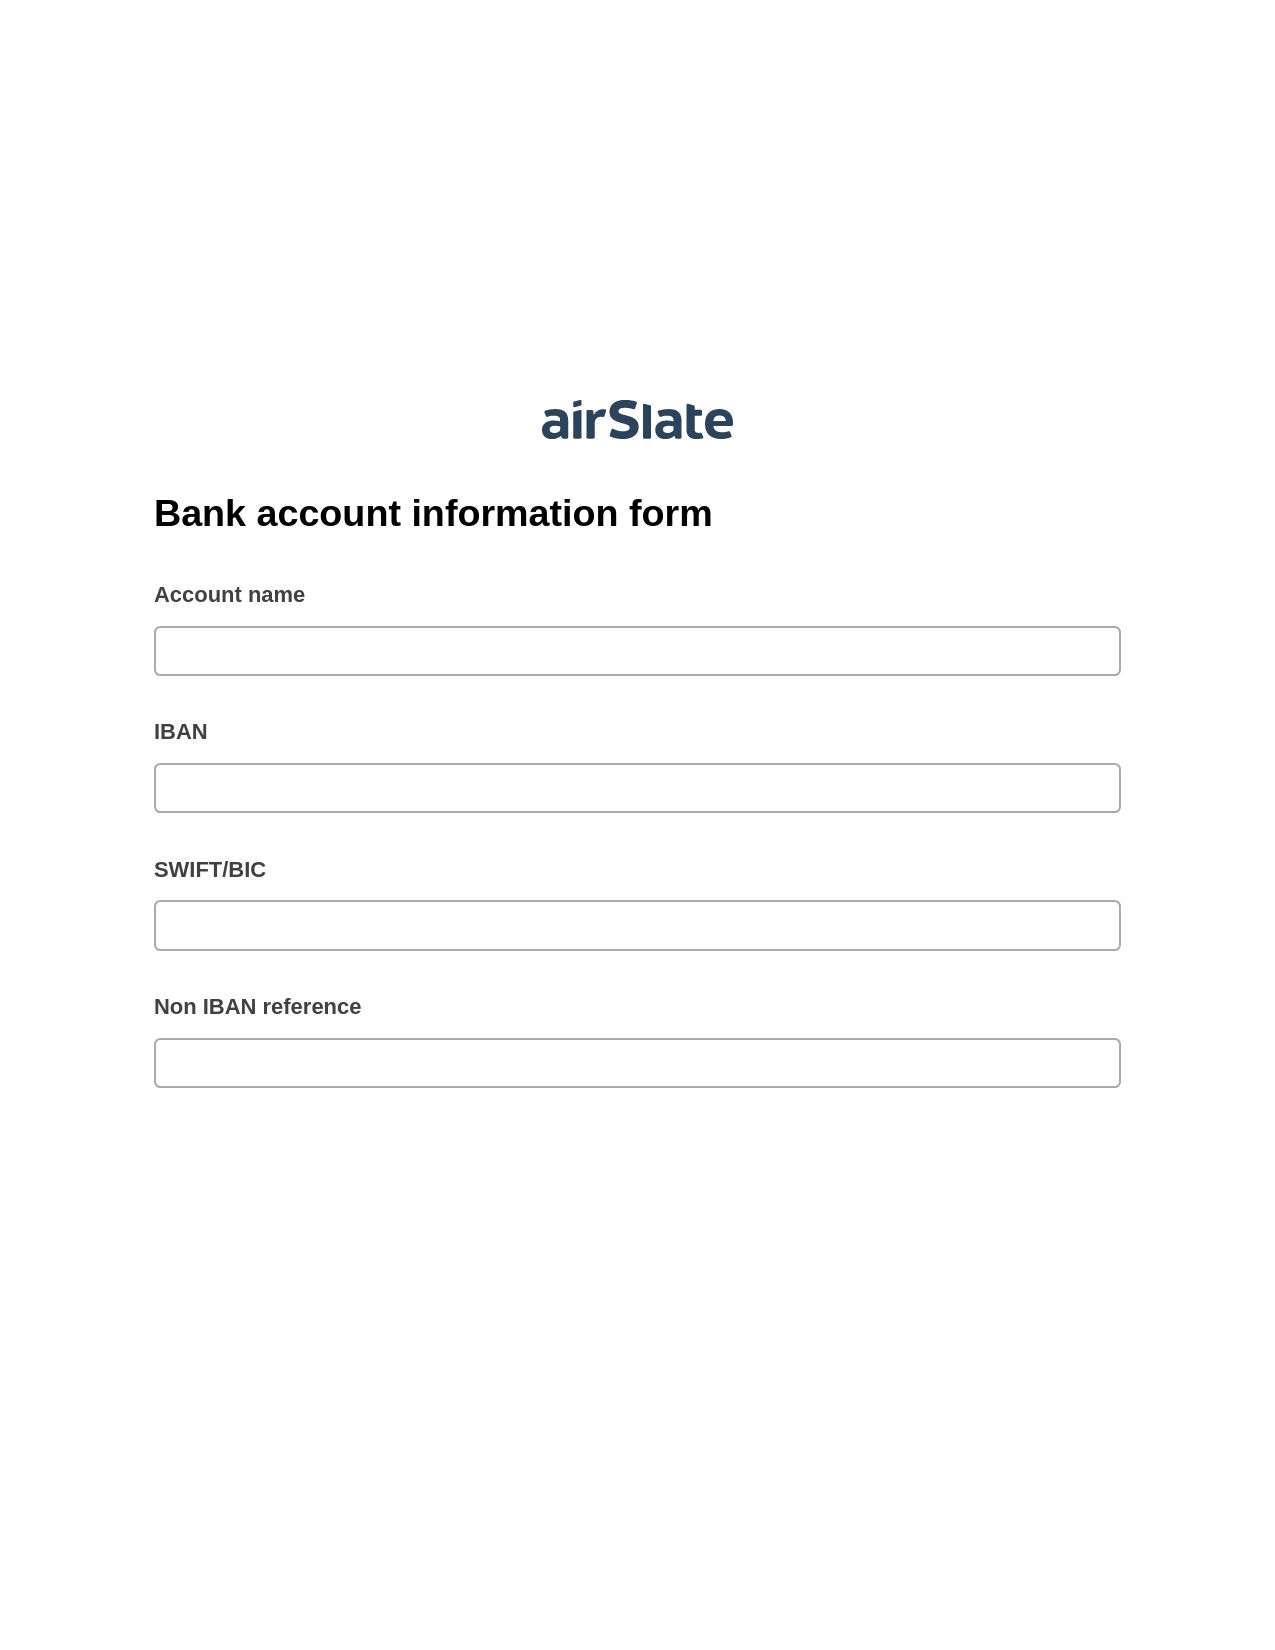 Bank account information form Pre-fill from MySQL Dropdown Options Bot, Remove Slate Bot, Archive to SharePoint Folder Bot